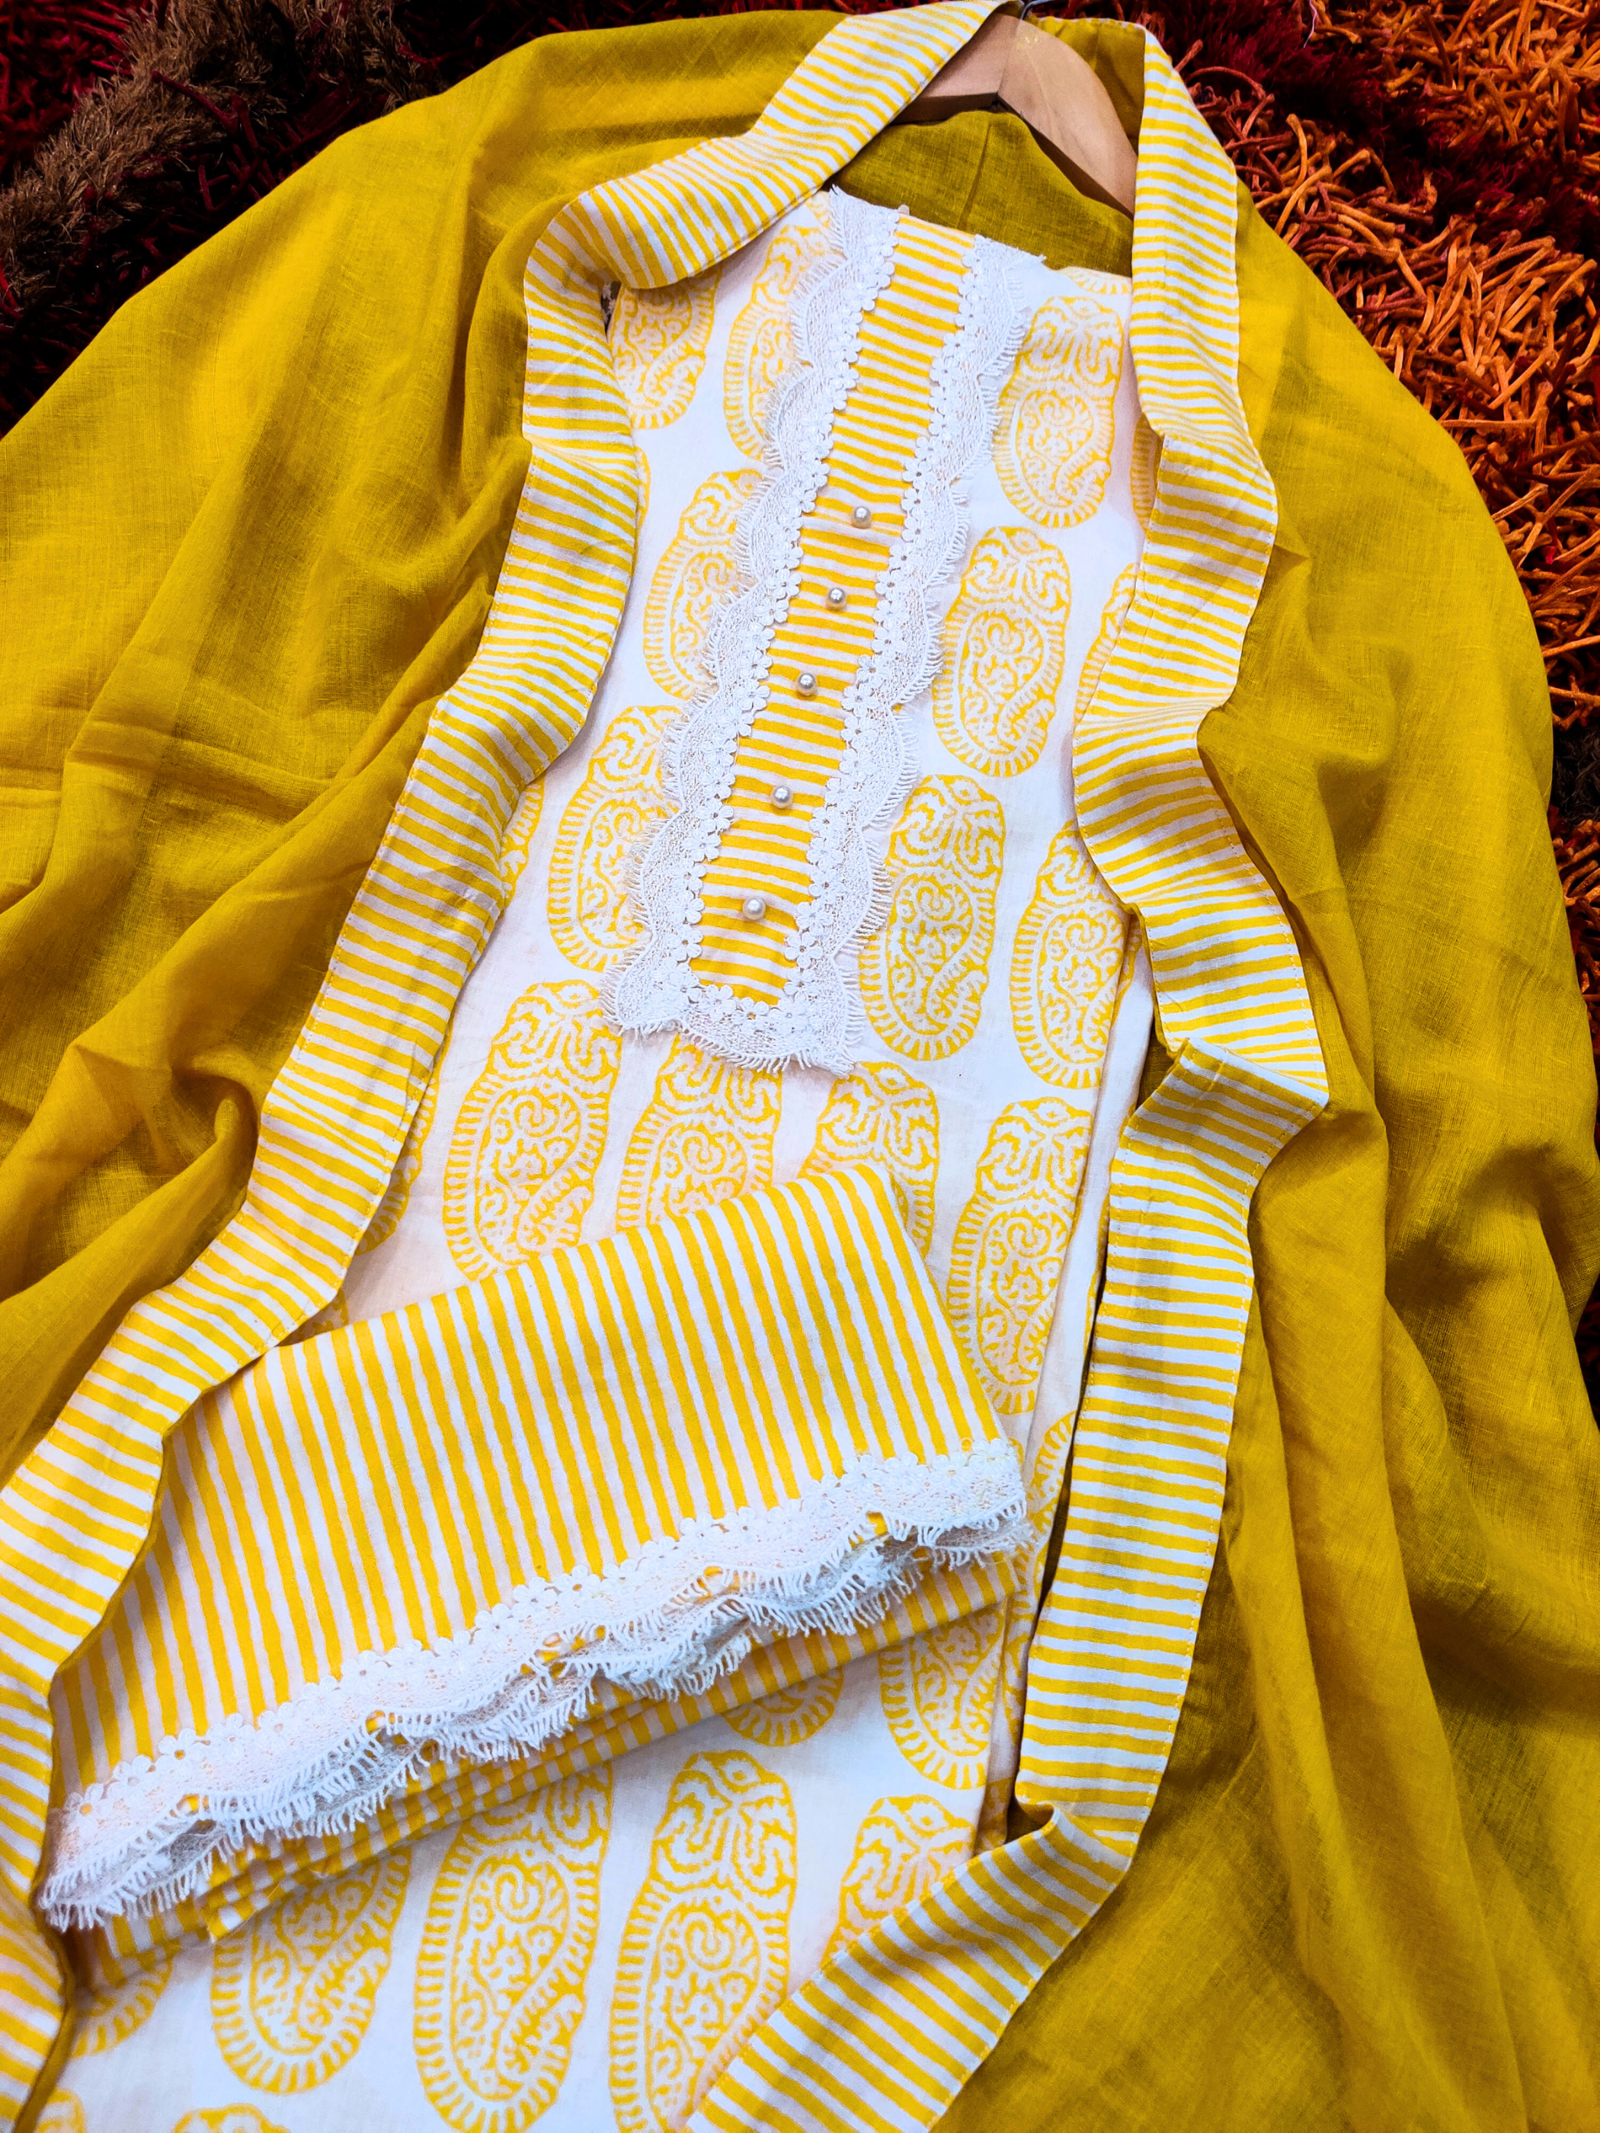 White and Yellow with Embellished White Lace Cotton Unstitched Dress Material Suit Set - Mom & You Clothing